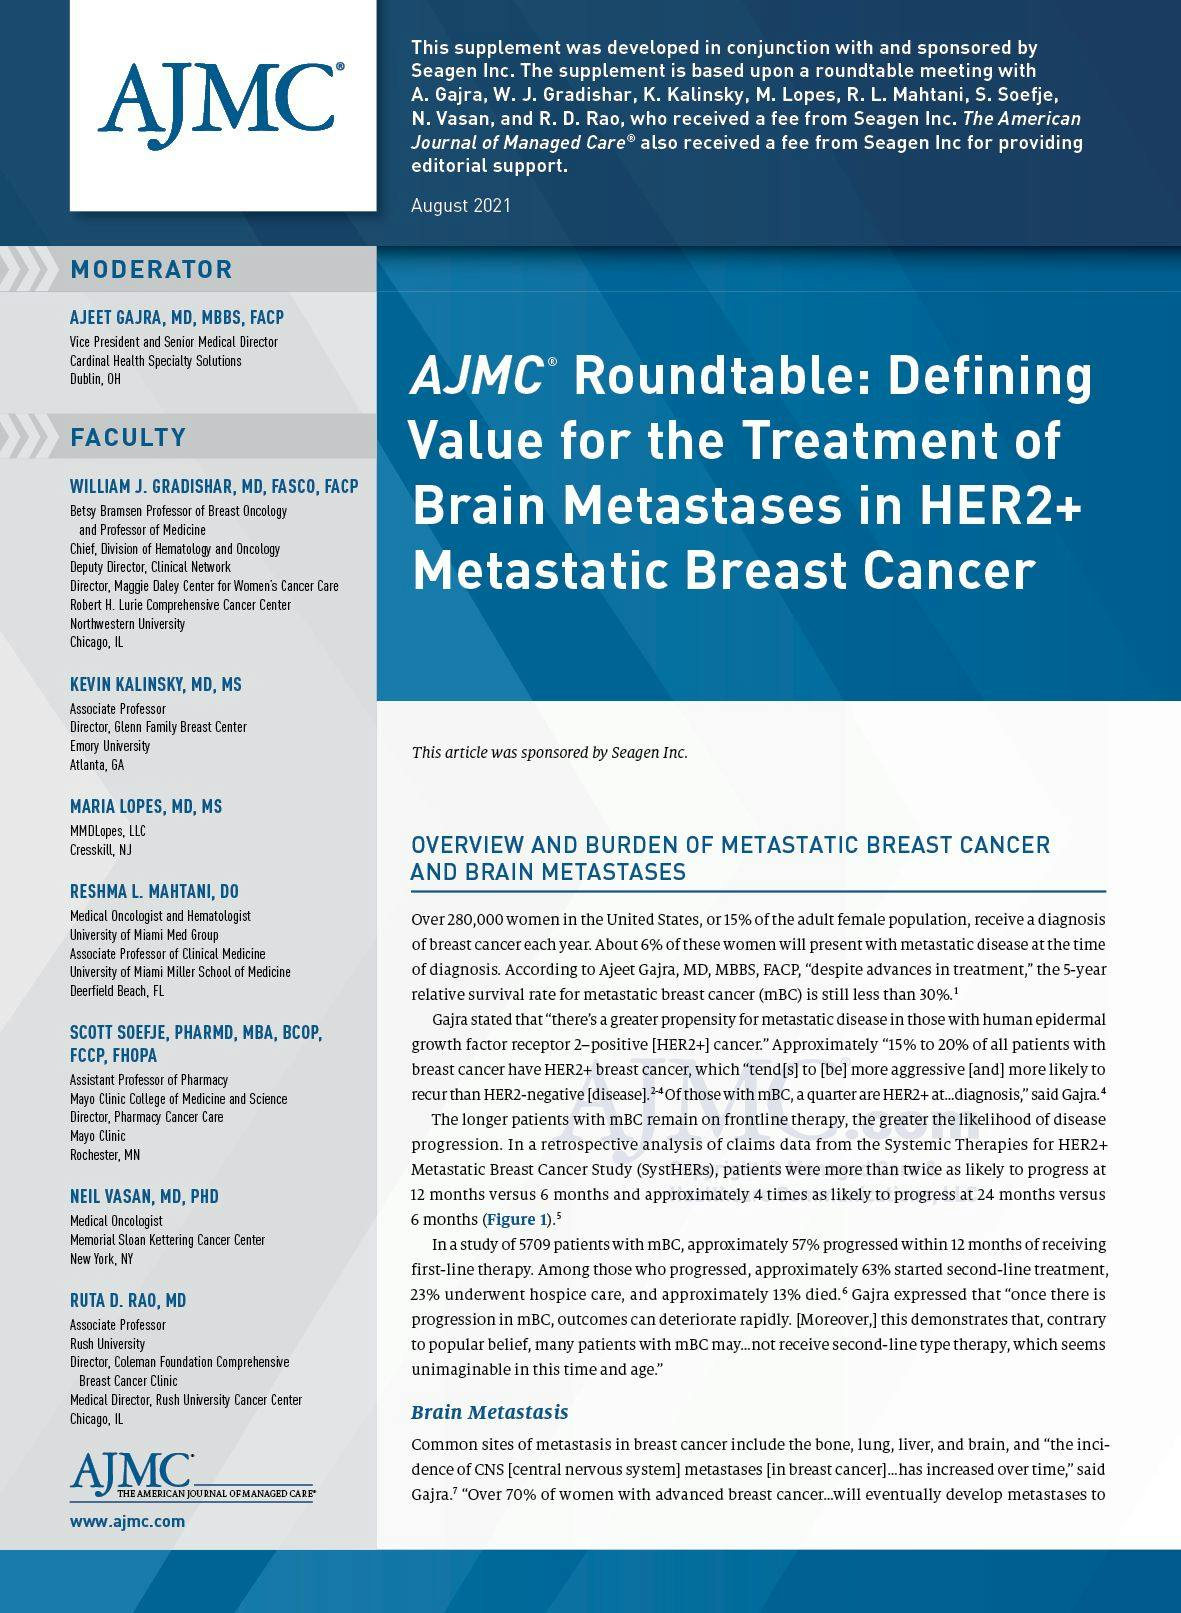 AJMC® Roundtable: Defining Value for the Treatment of Brain Metastases in HER2+ Metastatic Breast Cancer